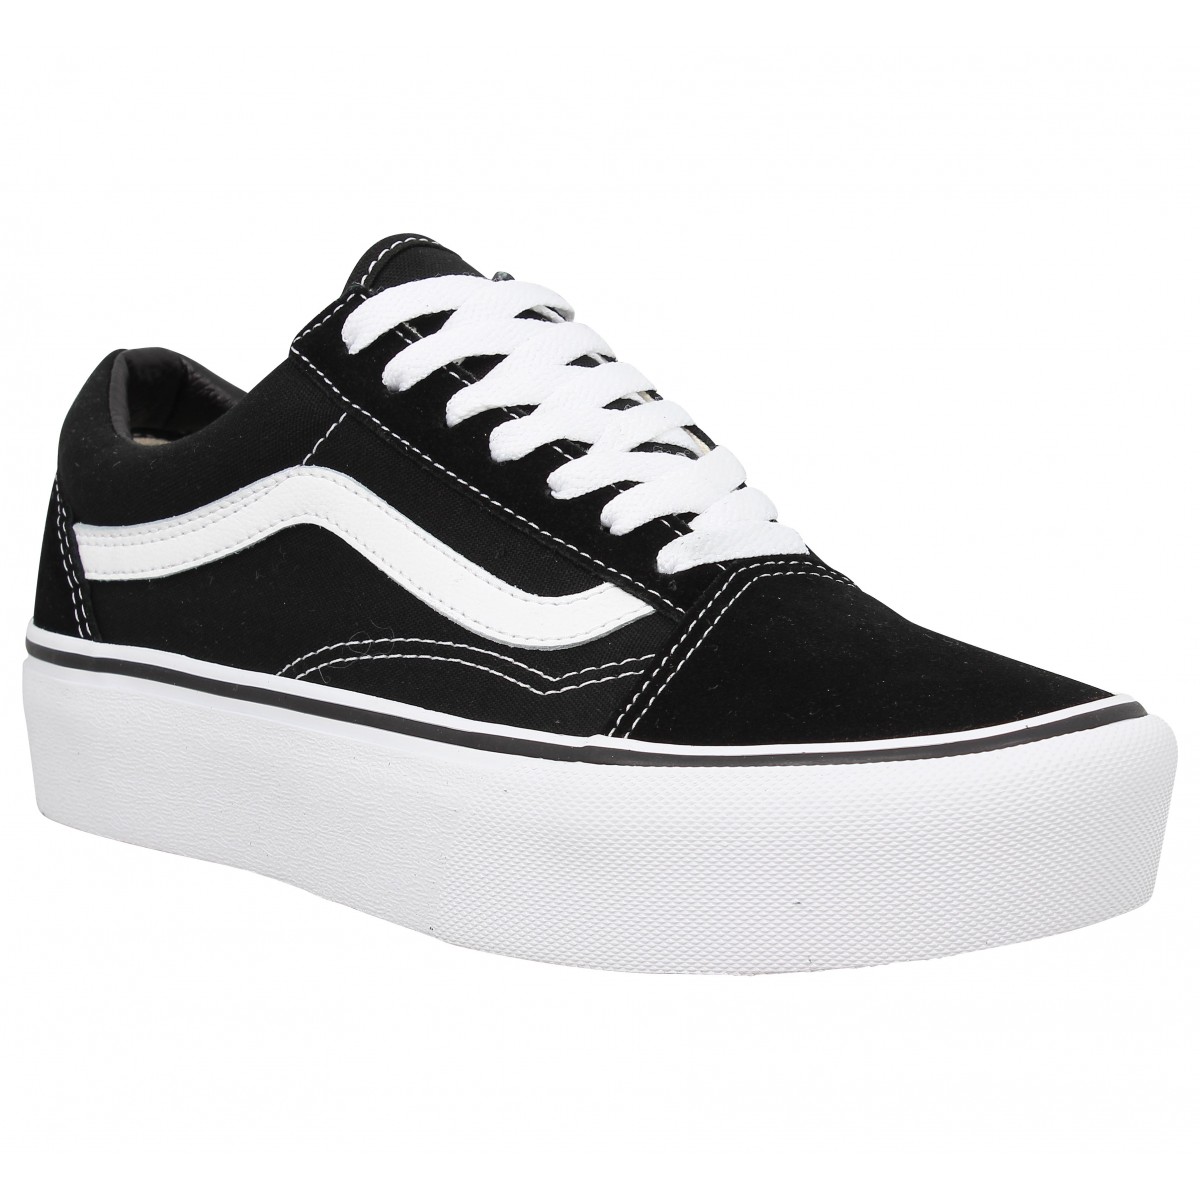 vans compensees Cheaper Than Retail Price> Buy Clothing ...